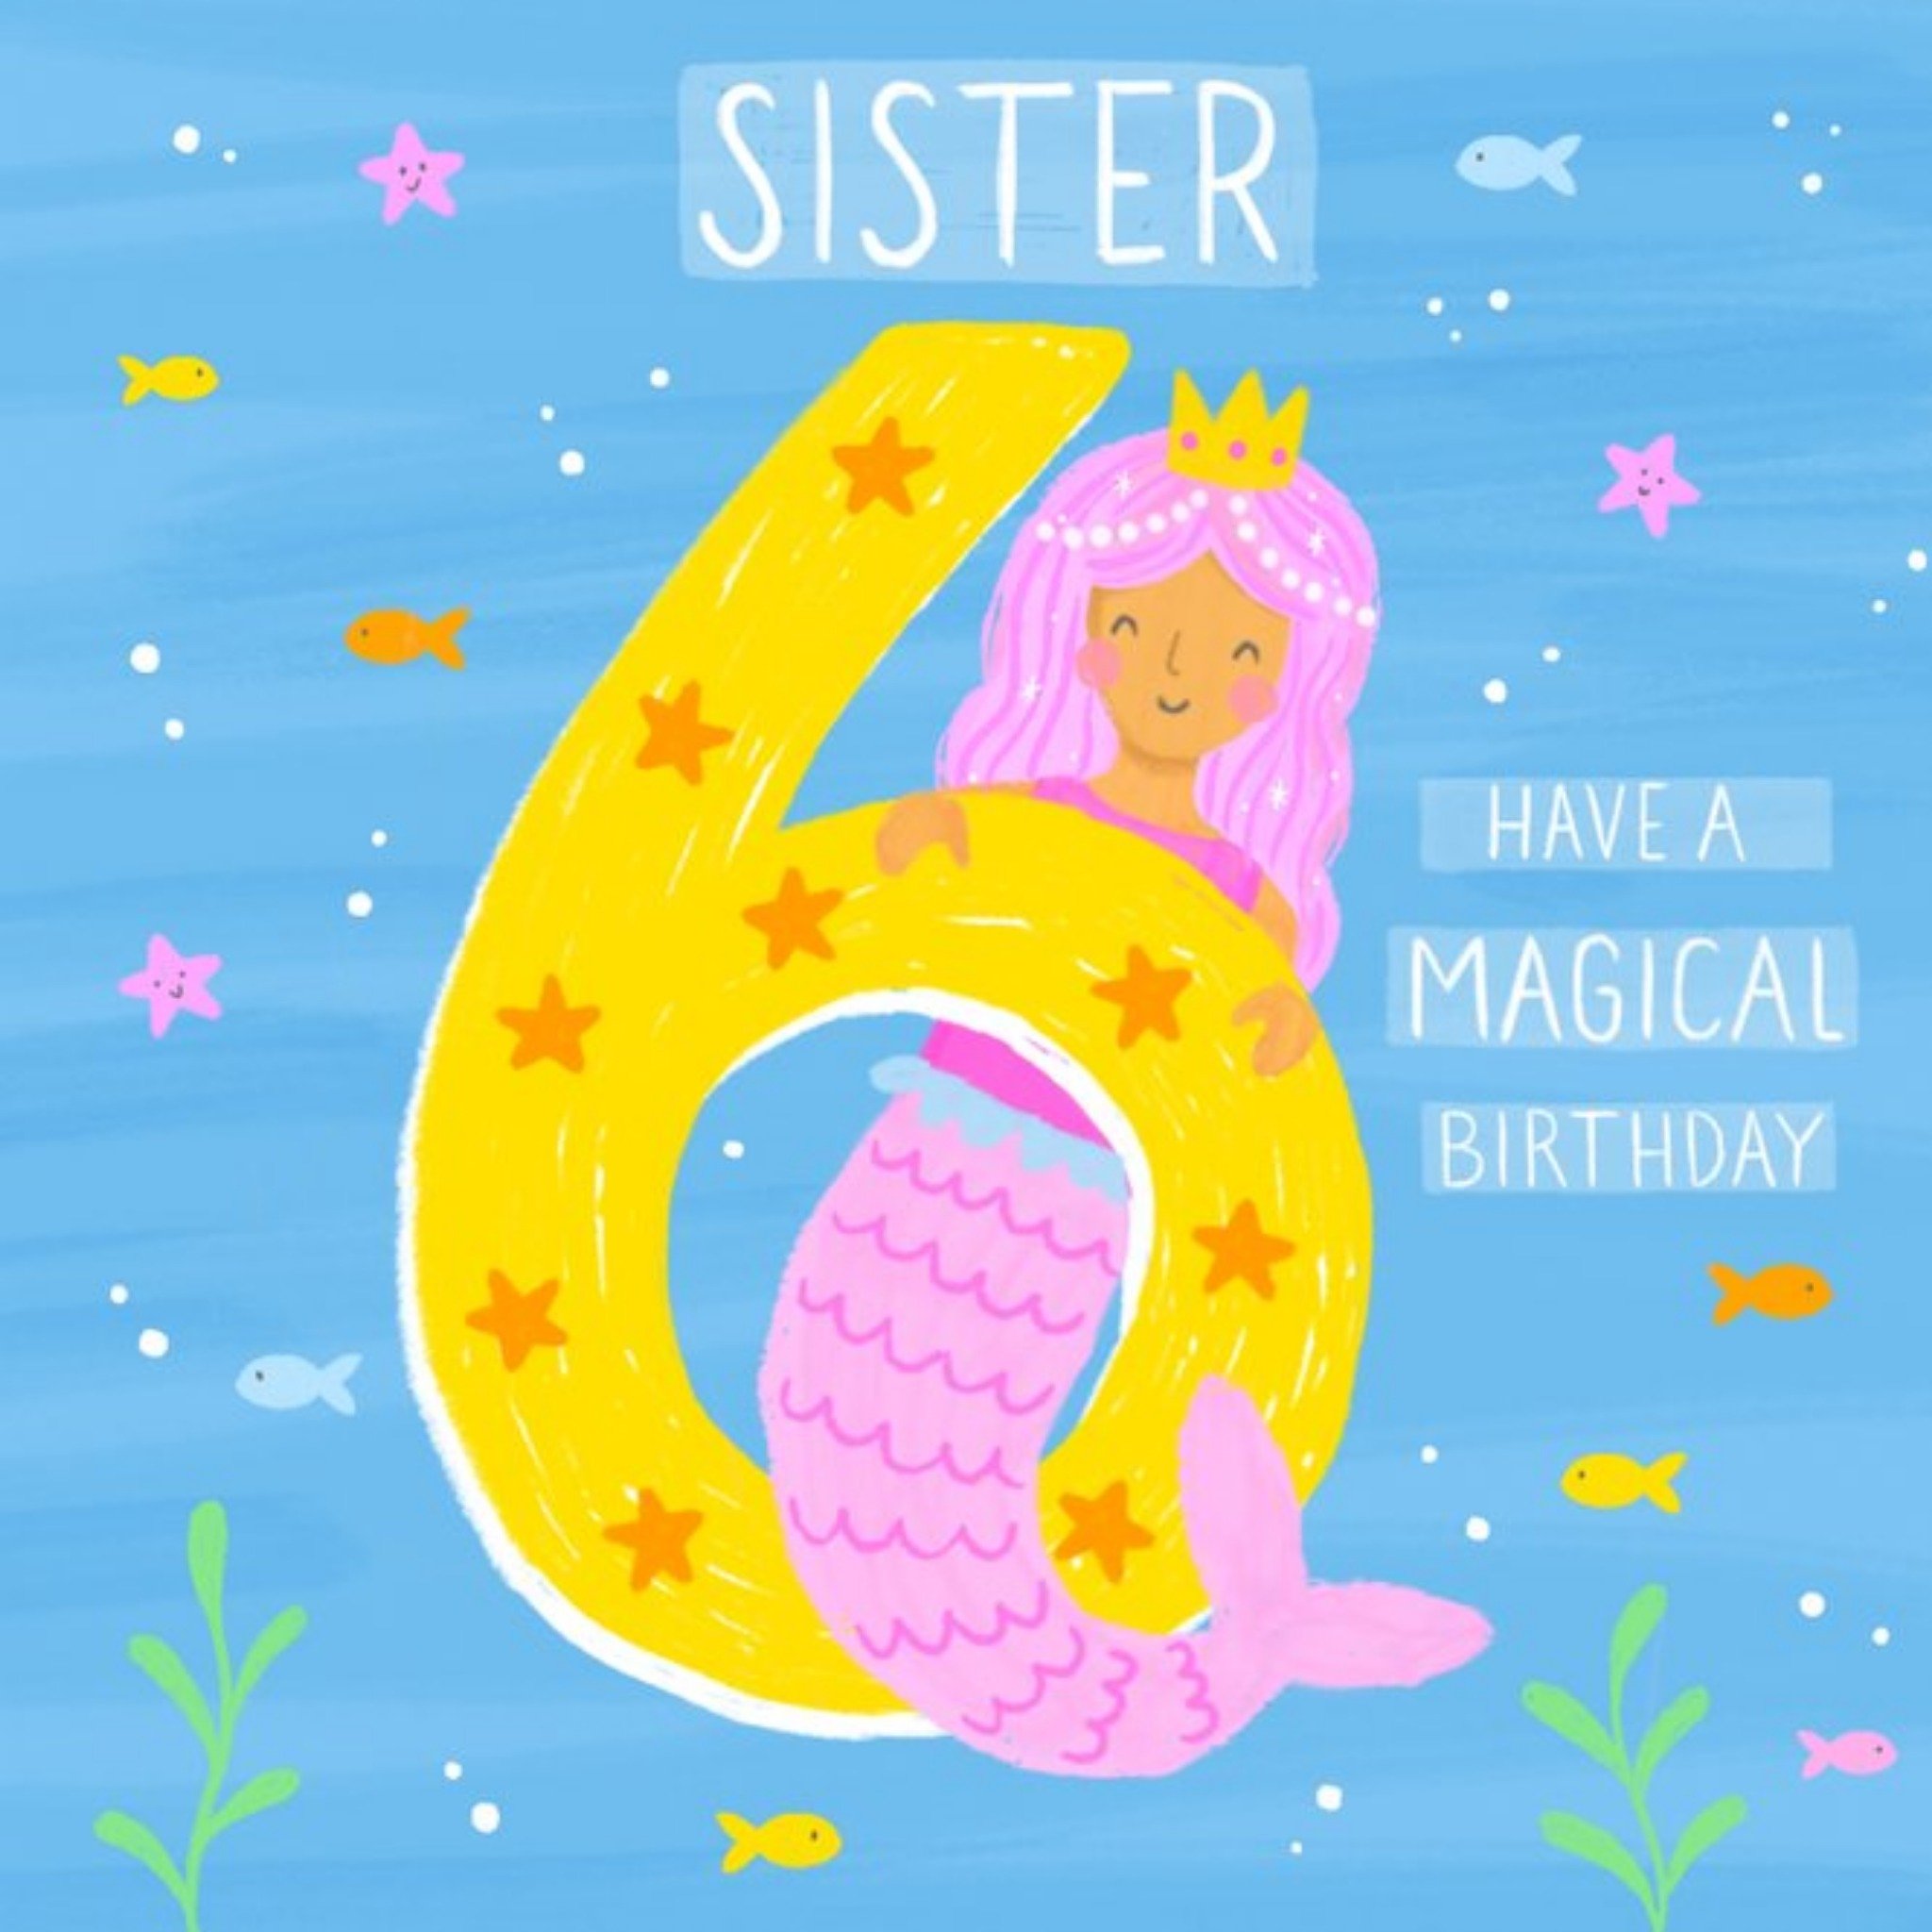 Moonpig Cute Illustrated Mermaid 6 Today Magical Sister Birthday Card, Large